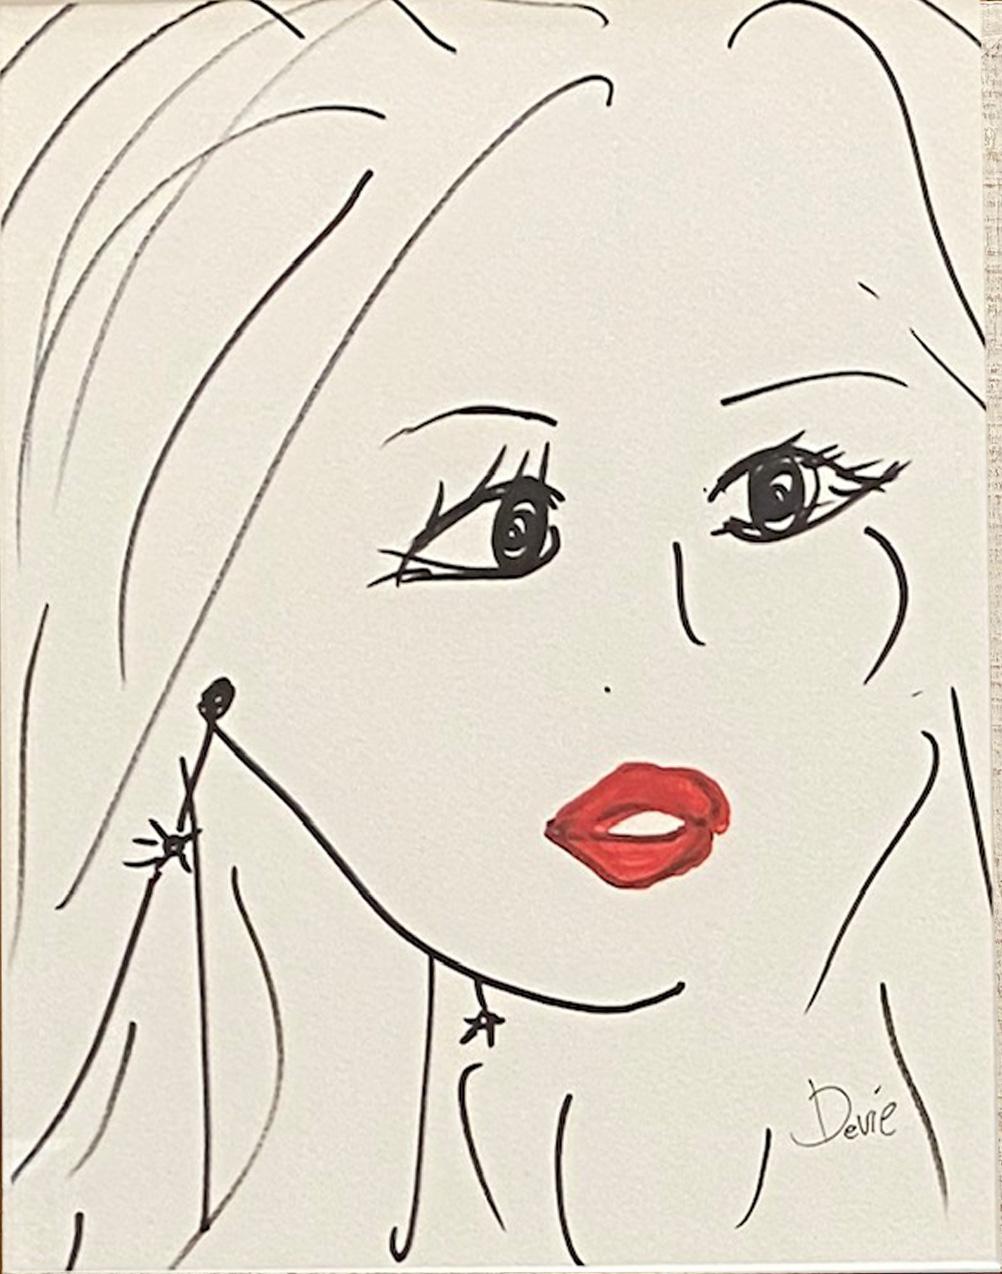 'A Woman With Red Lips' Pen and Ink & Acrylic on paper by Devie